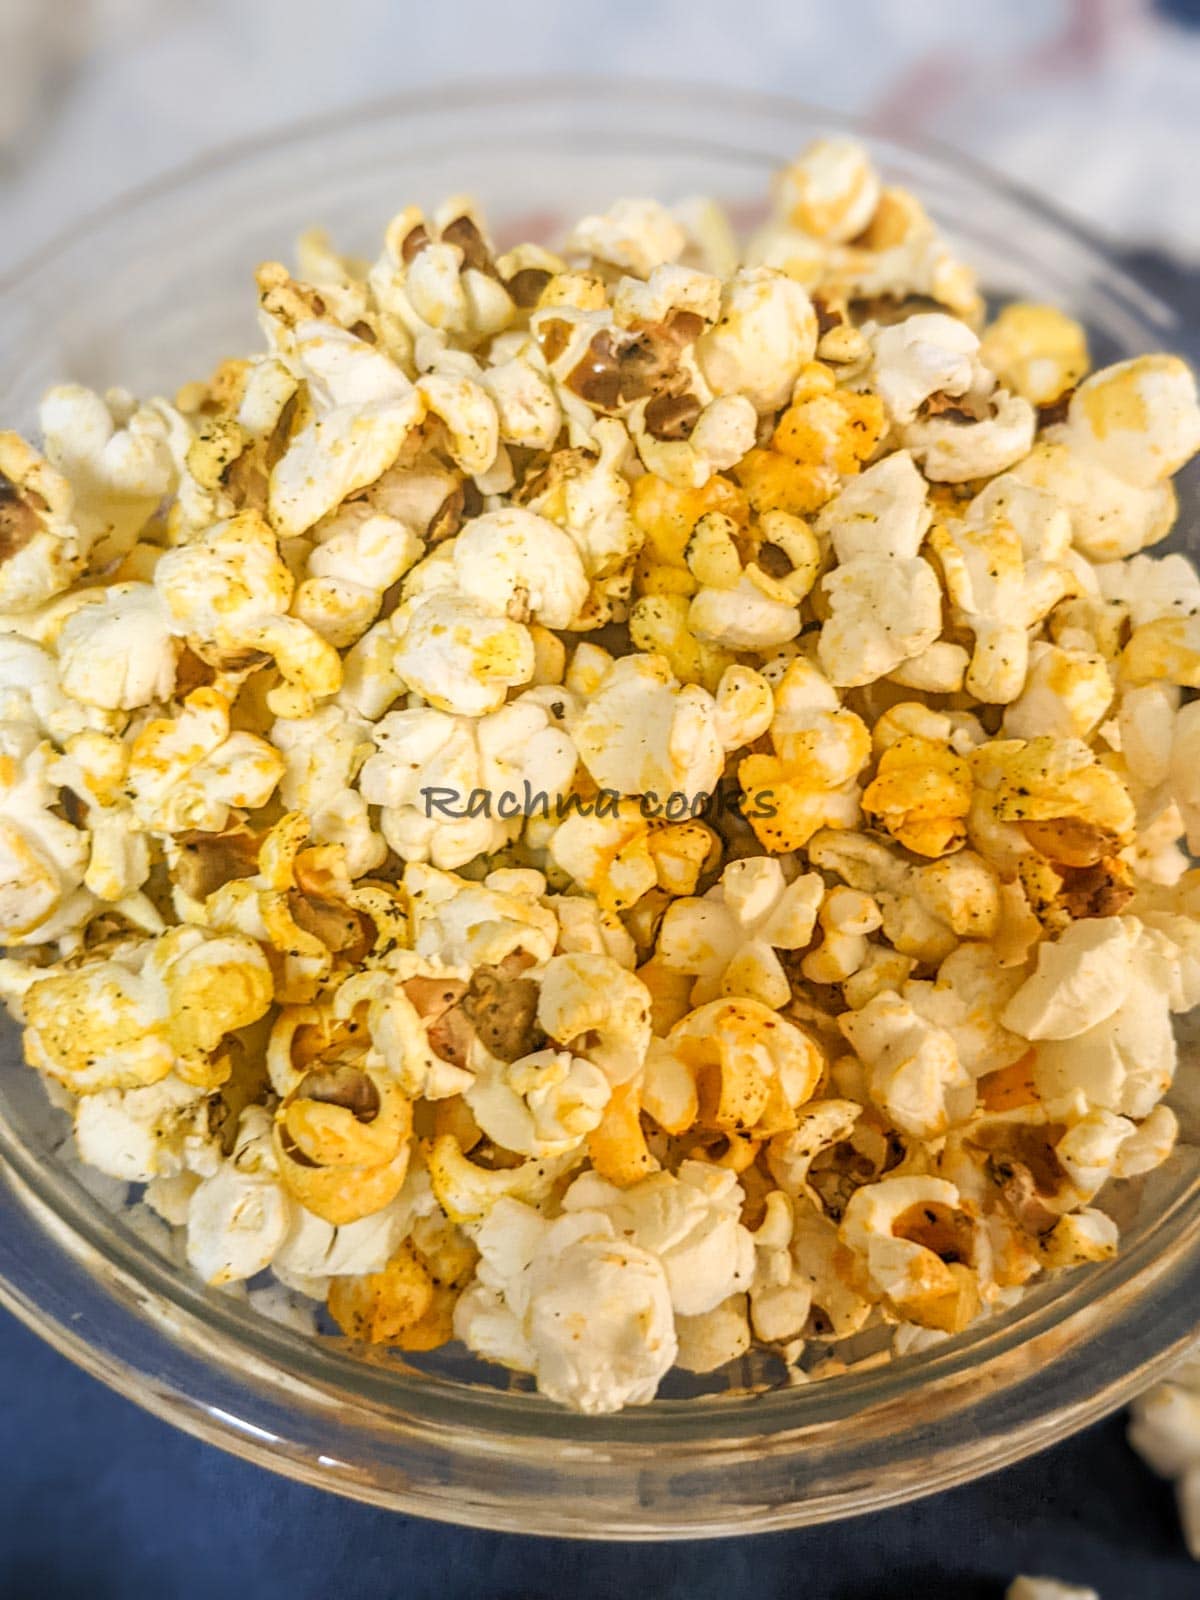 Top shot of popcorn in a glass bowl with a blue background